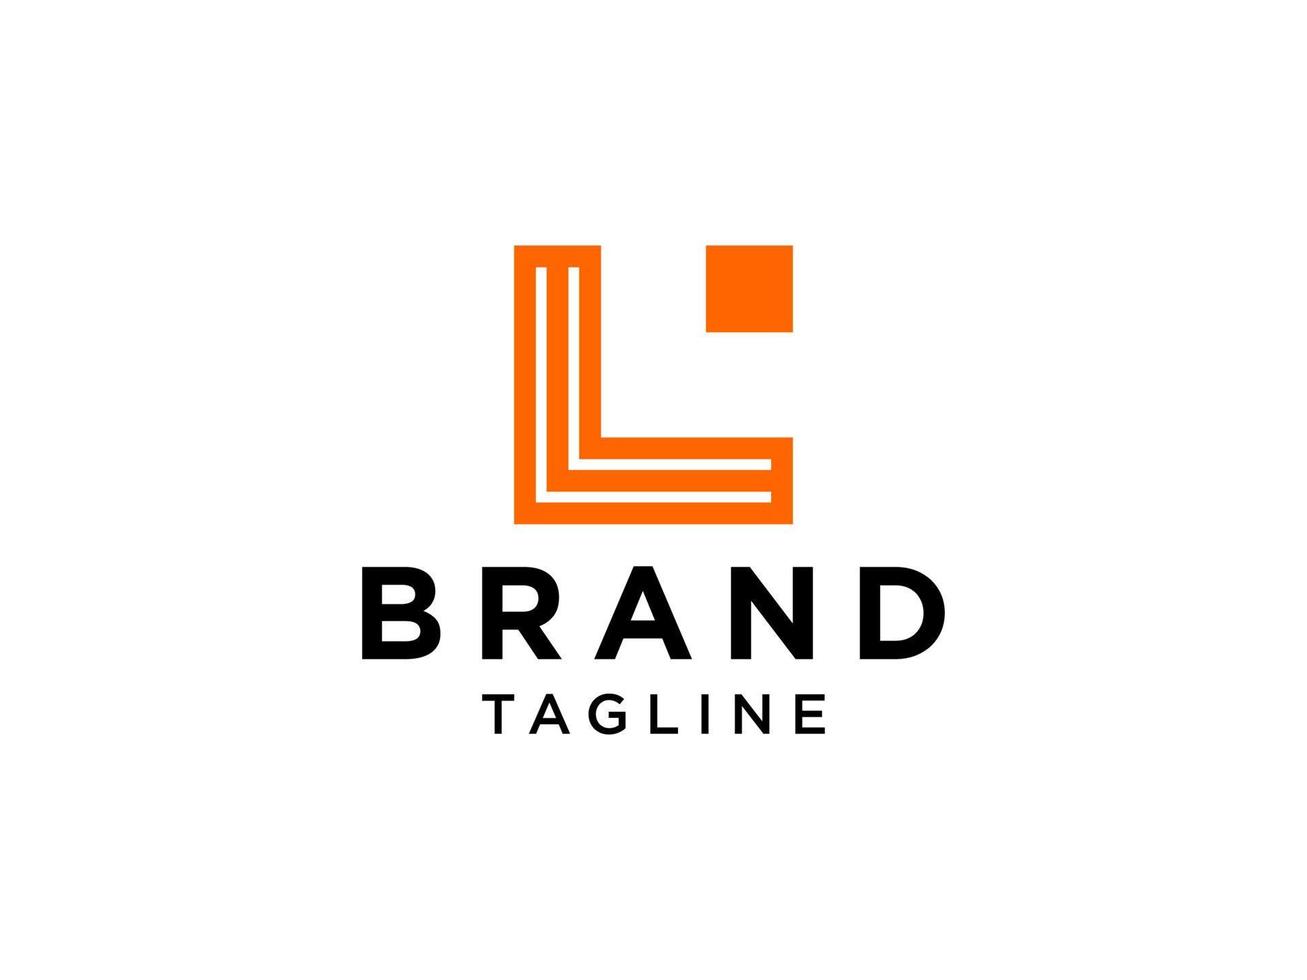 Abstract Initial Letter L Logo. Orange Shape Linear Style Linked with line Symbol. Usable for Business, Healthcare, Nature and Farm Logos. Flat Vector Logo Design Template Element.